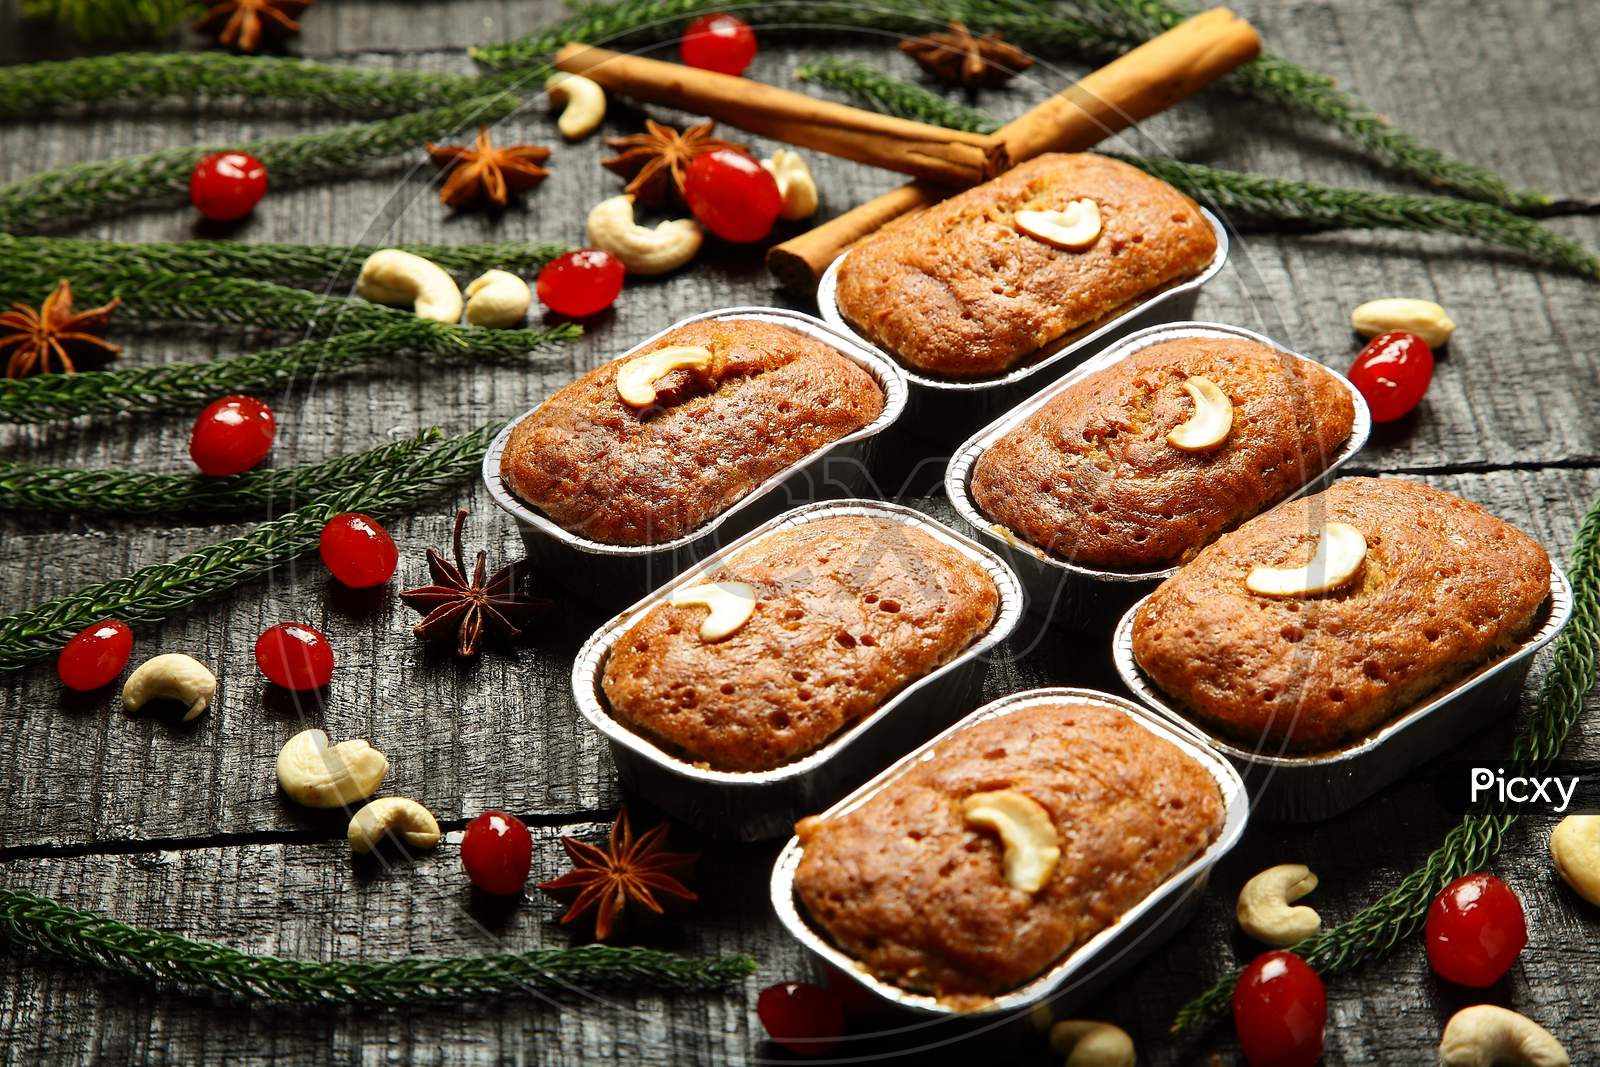 Christmas cakes on a holidays background.